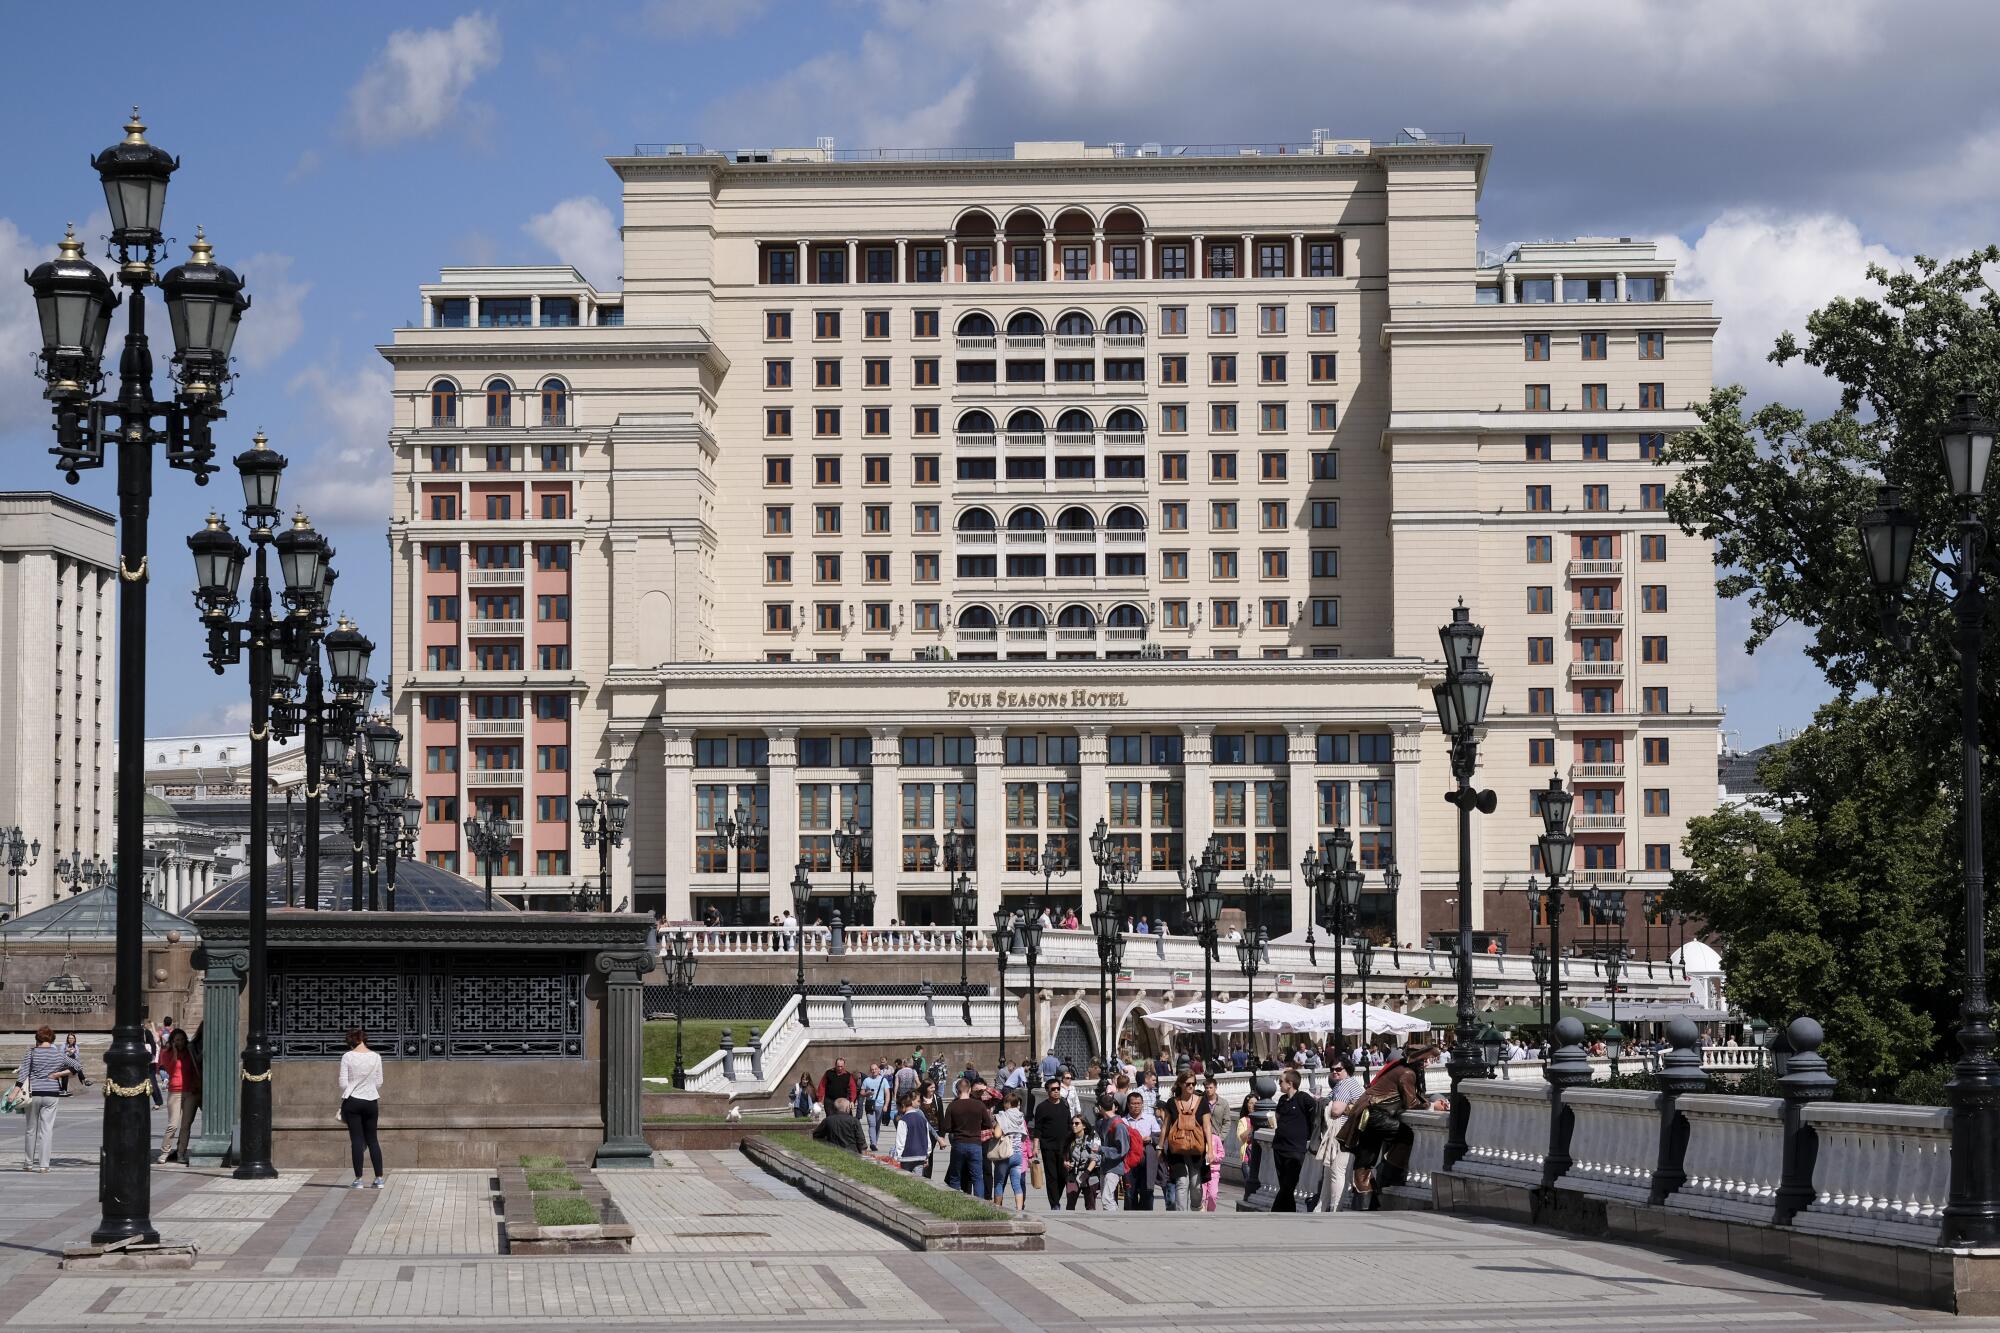 Exterior view of the Four Seasons Hotel in Moscow